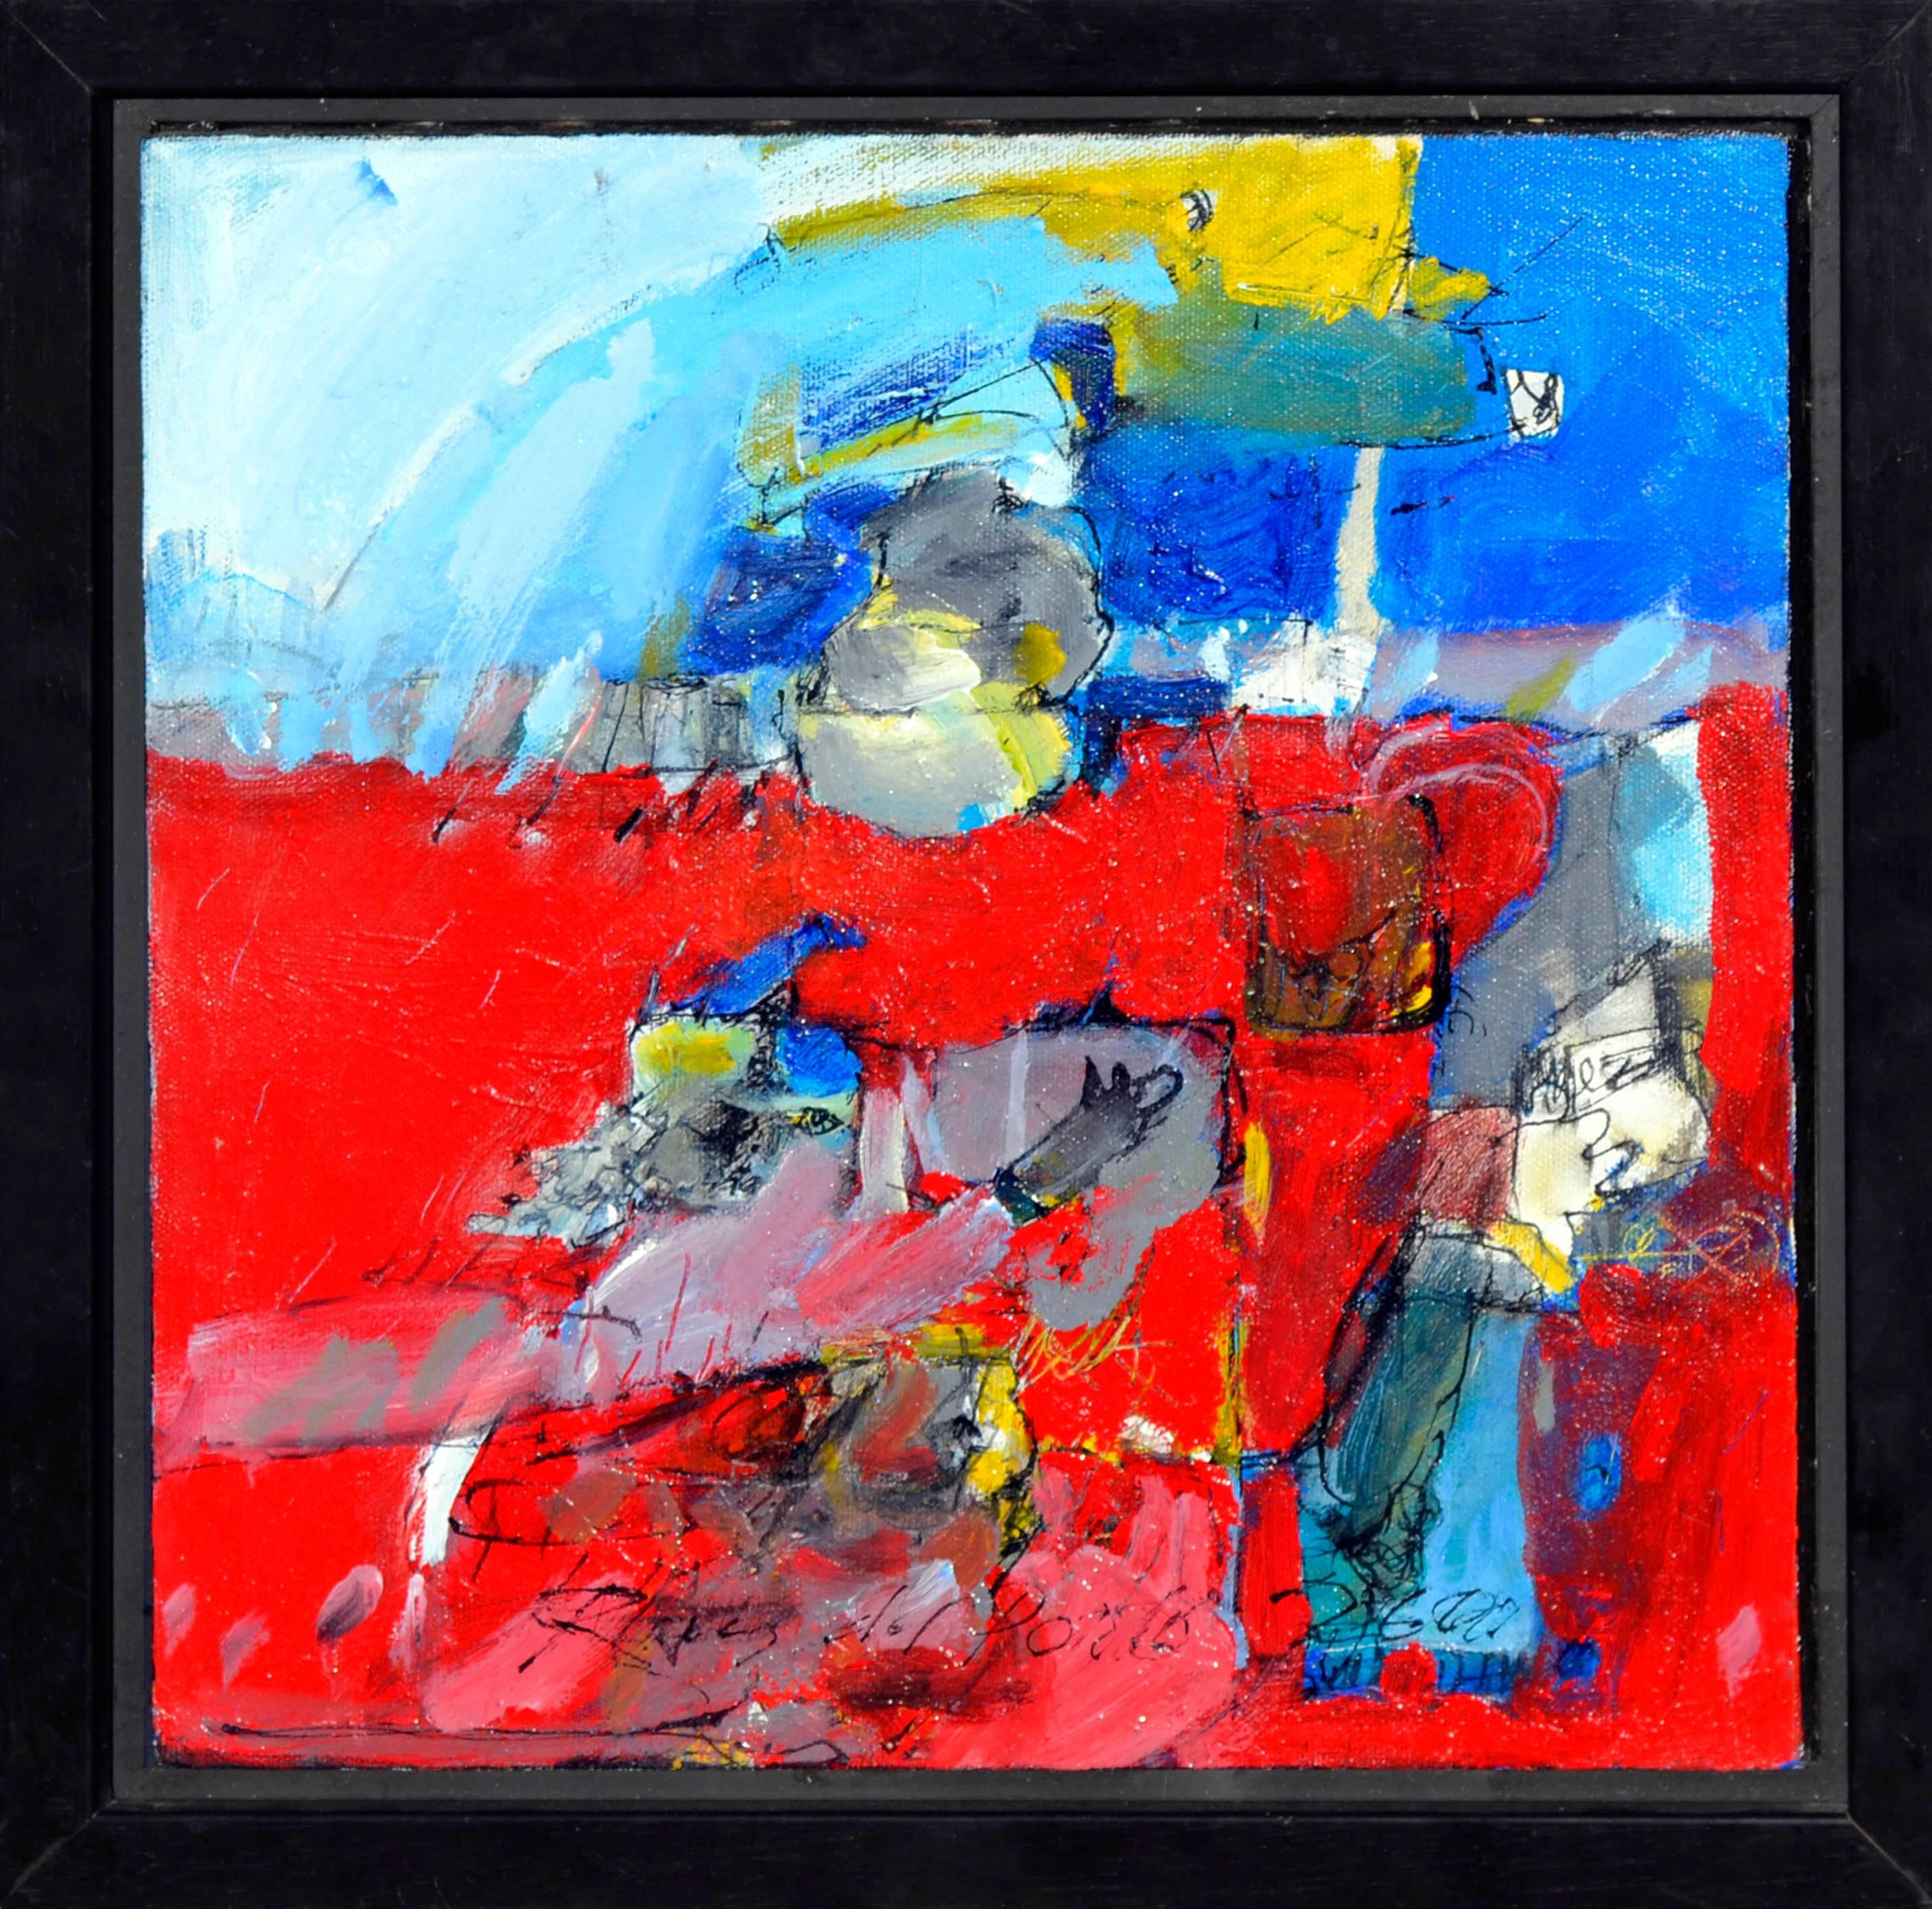 Francisco Ruiz del Porto Abstract Painting - Fetishes, Abstract in Red, Blue and Yellow